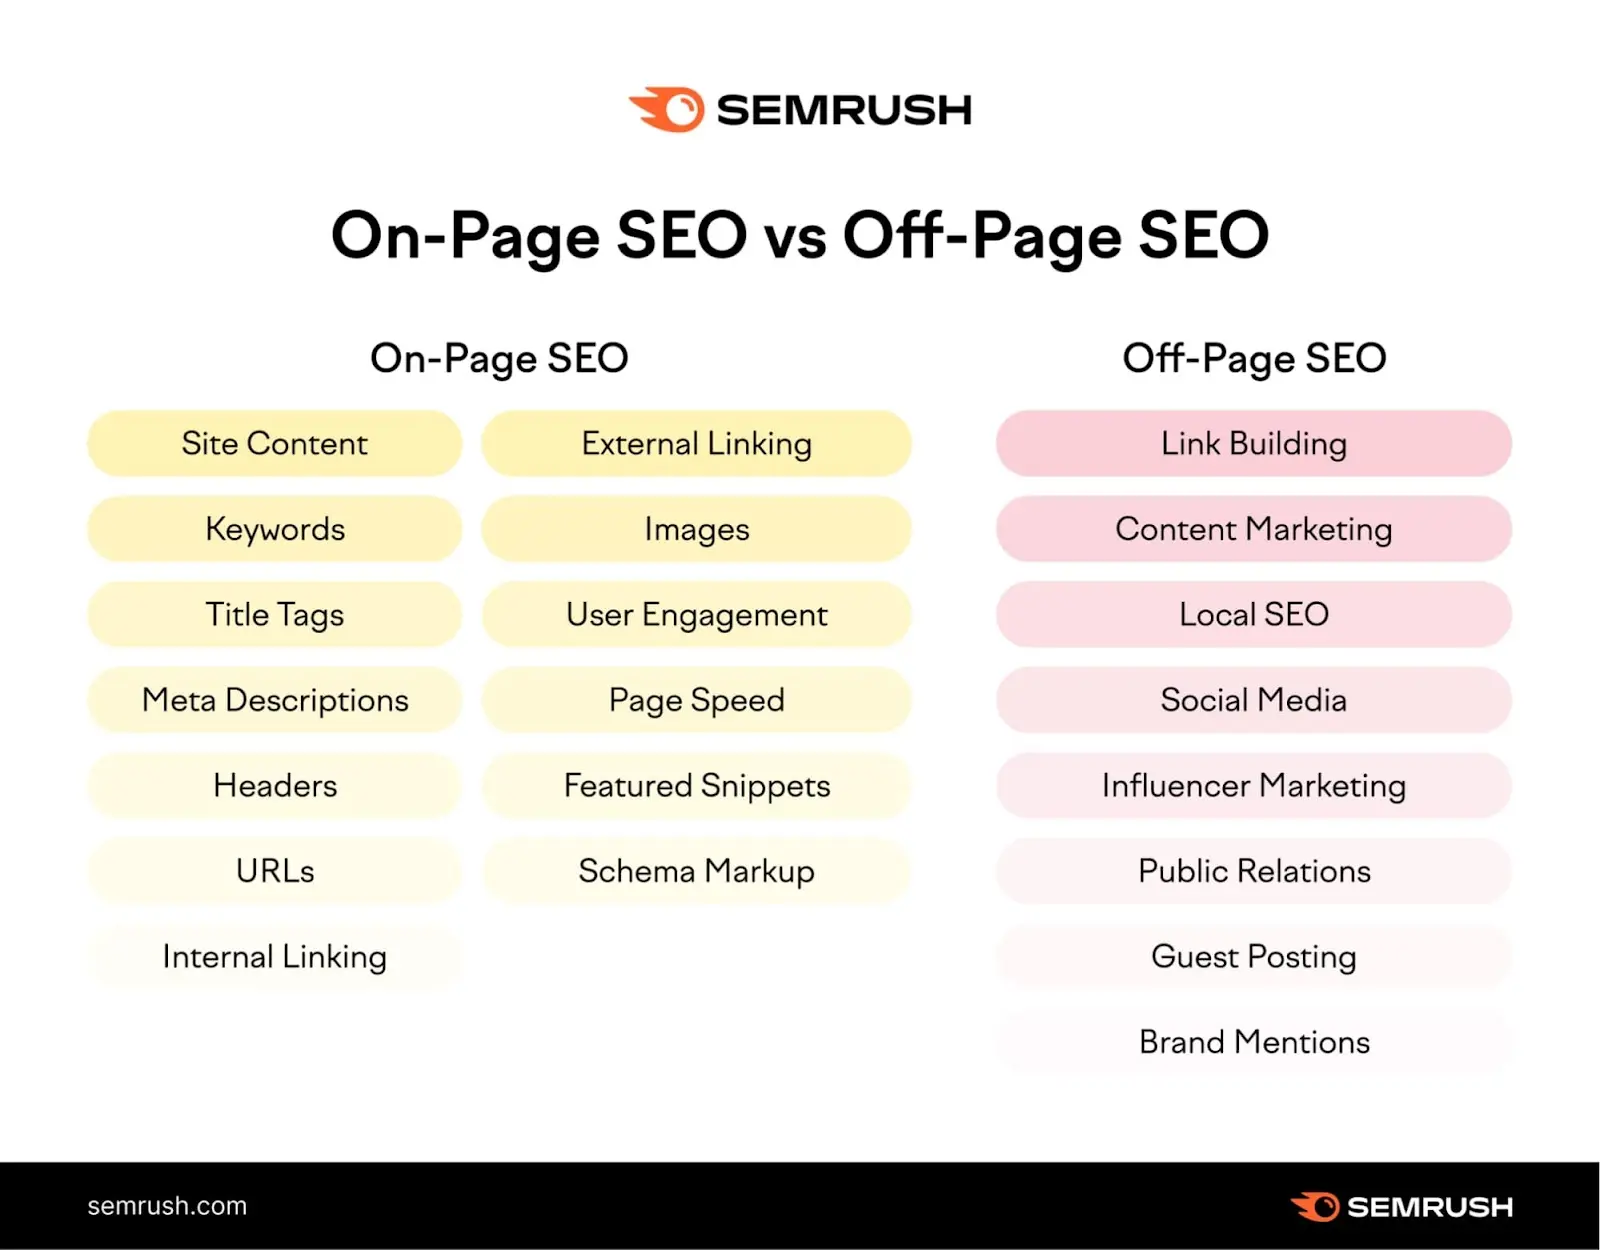 An overview of the tactics used in on-page and off-page SEO